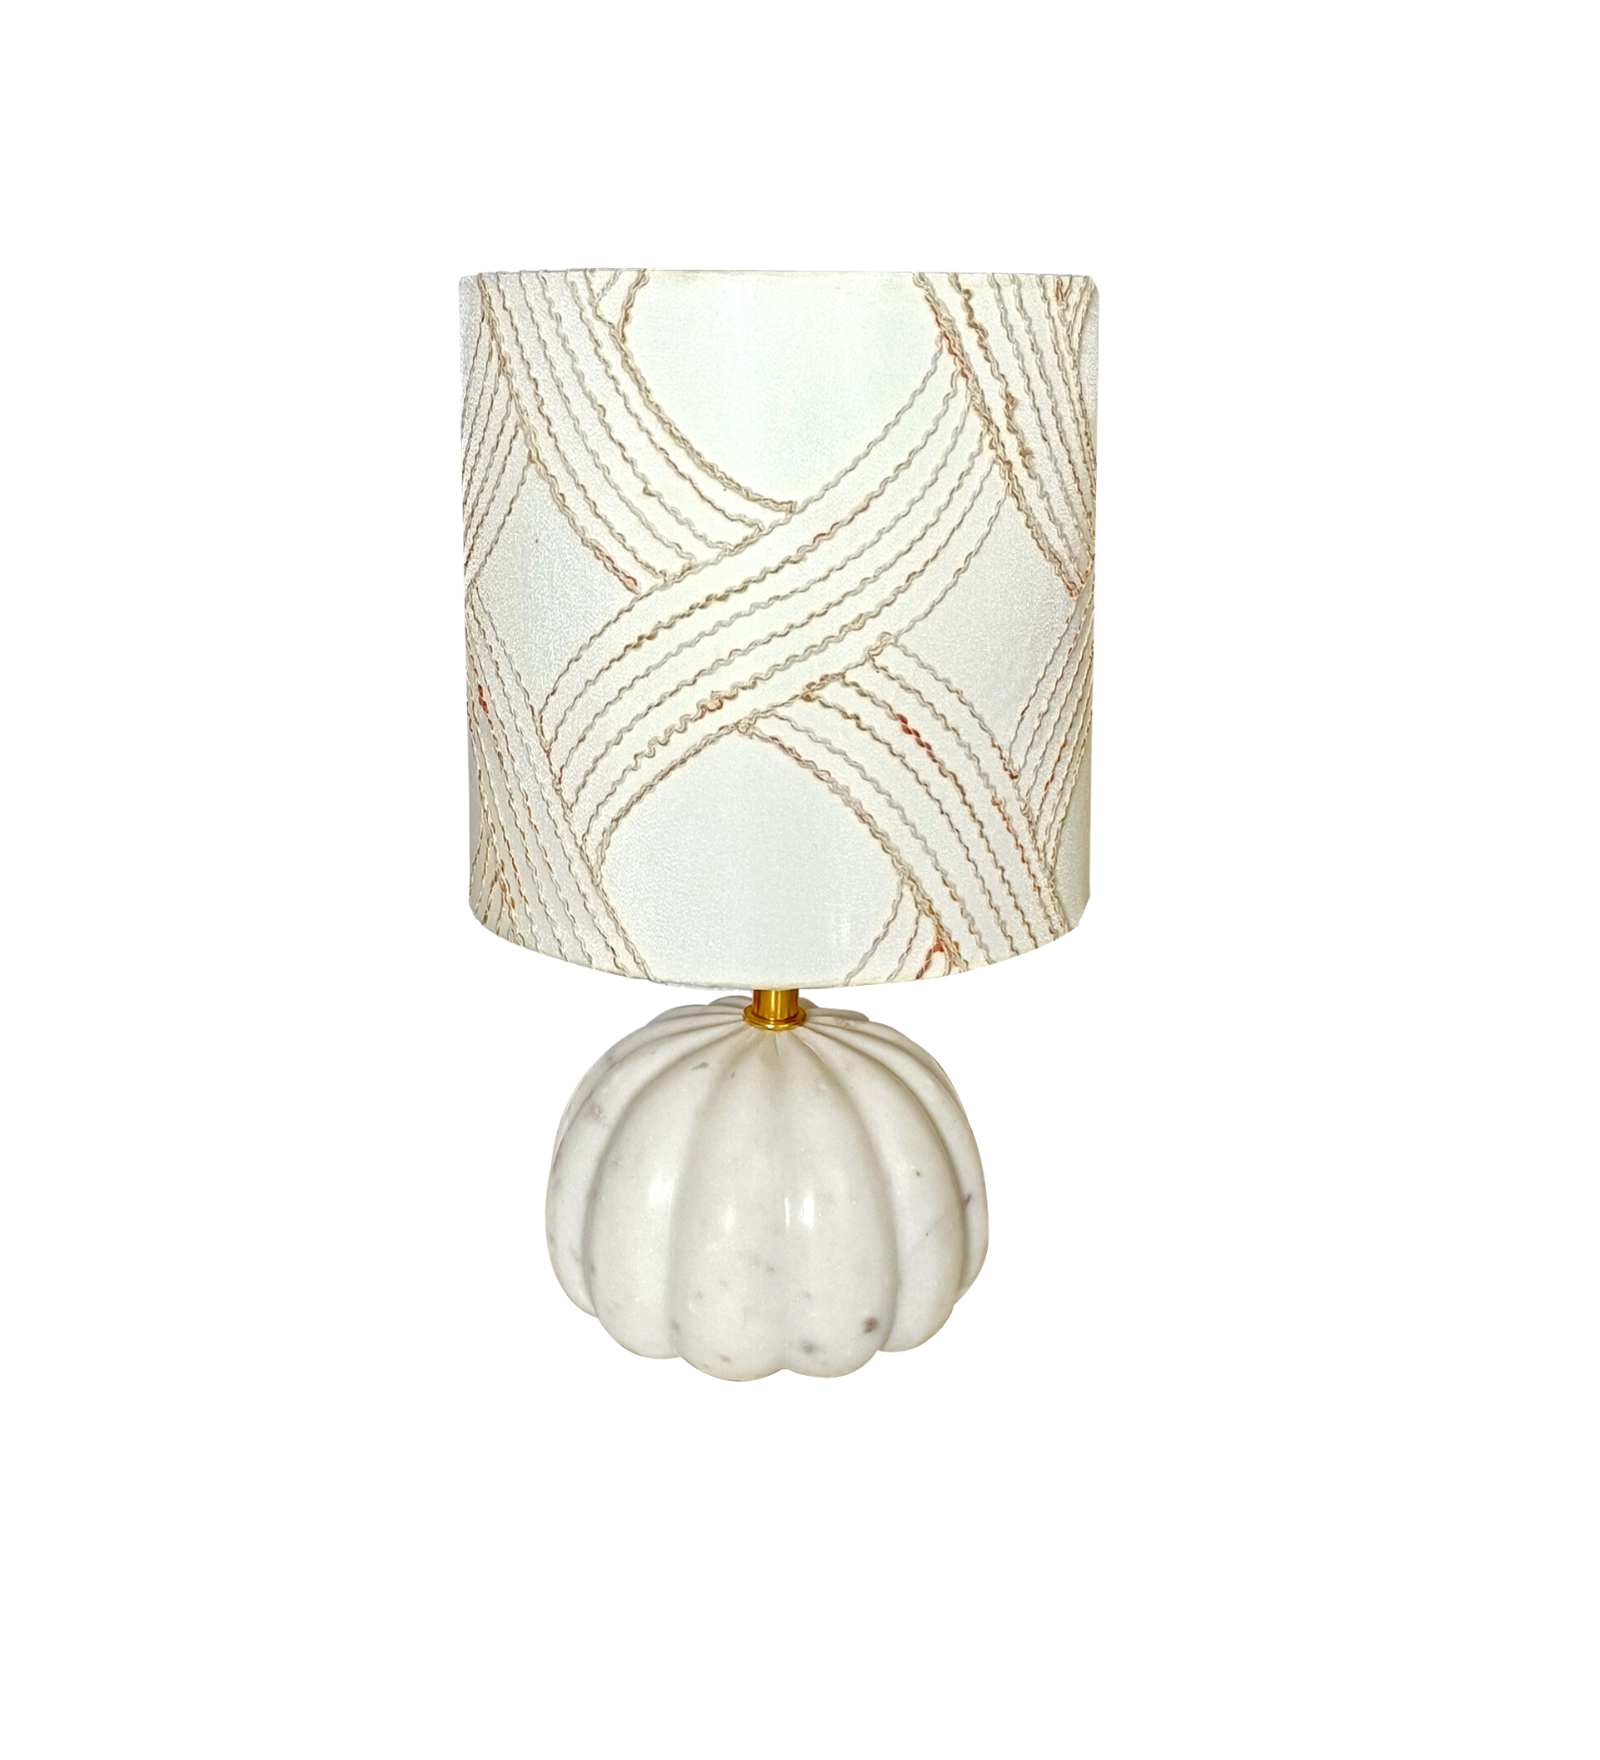 Endearing Marble Table lamp